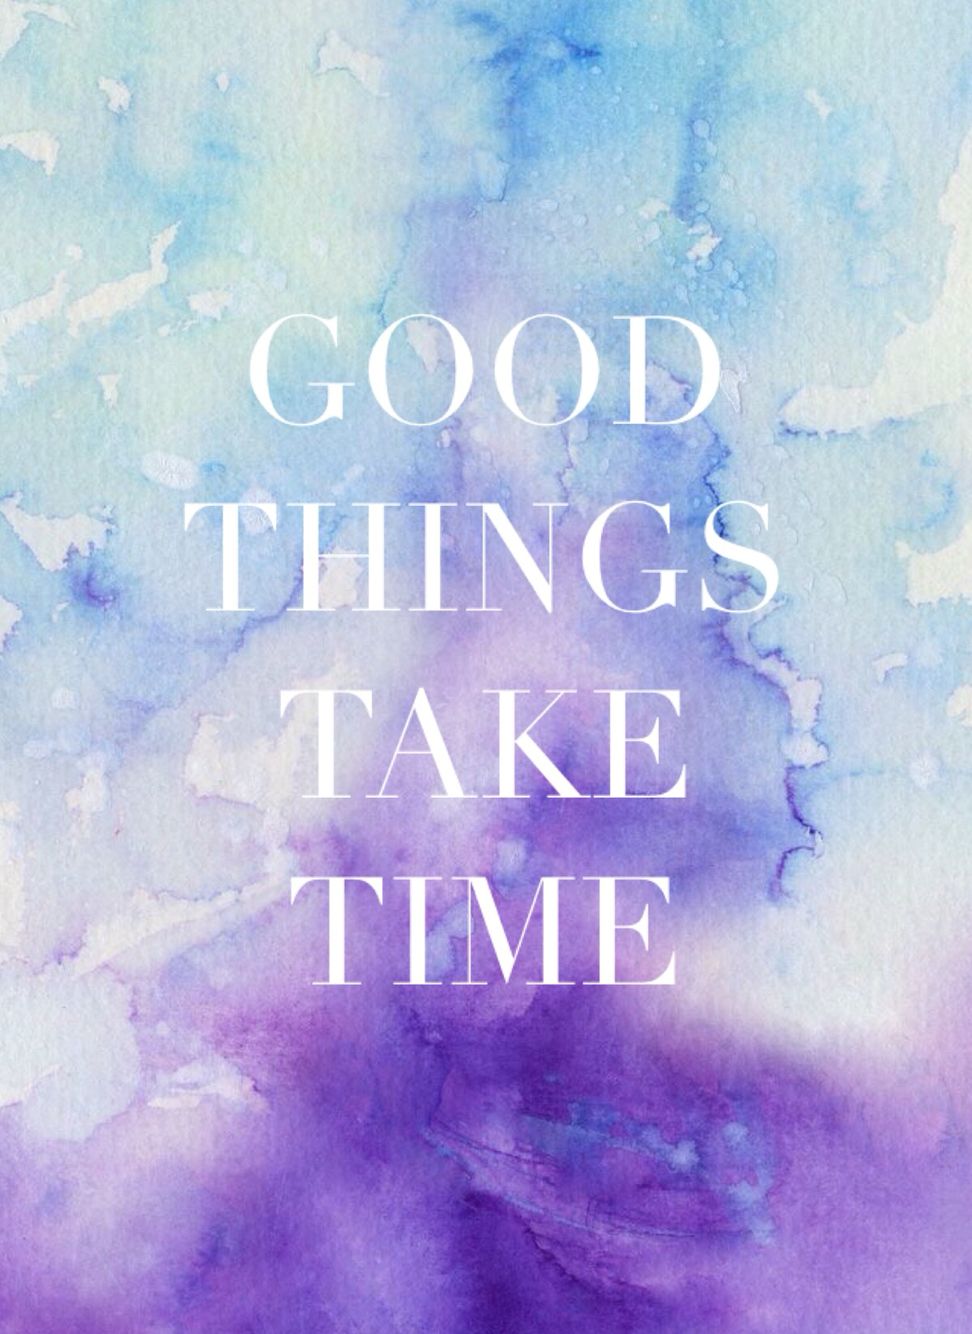 GOOD THINGS TAKE TIME iPhone quote wallpaper. Good things take time, Wallpaper quotes, Lord shiva HD wallpaper